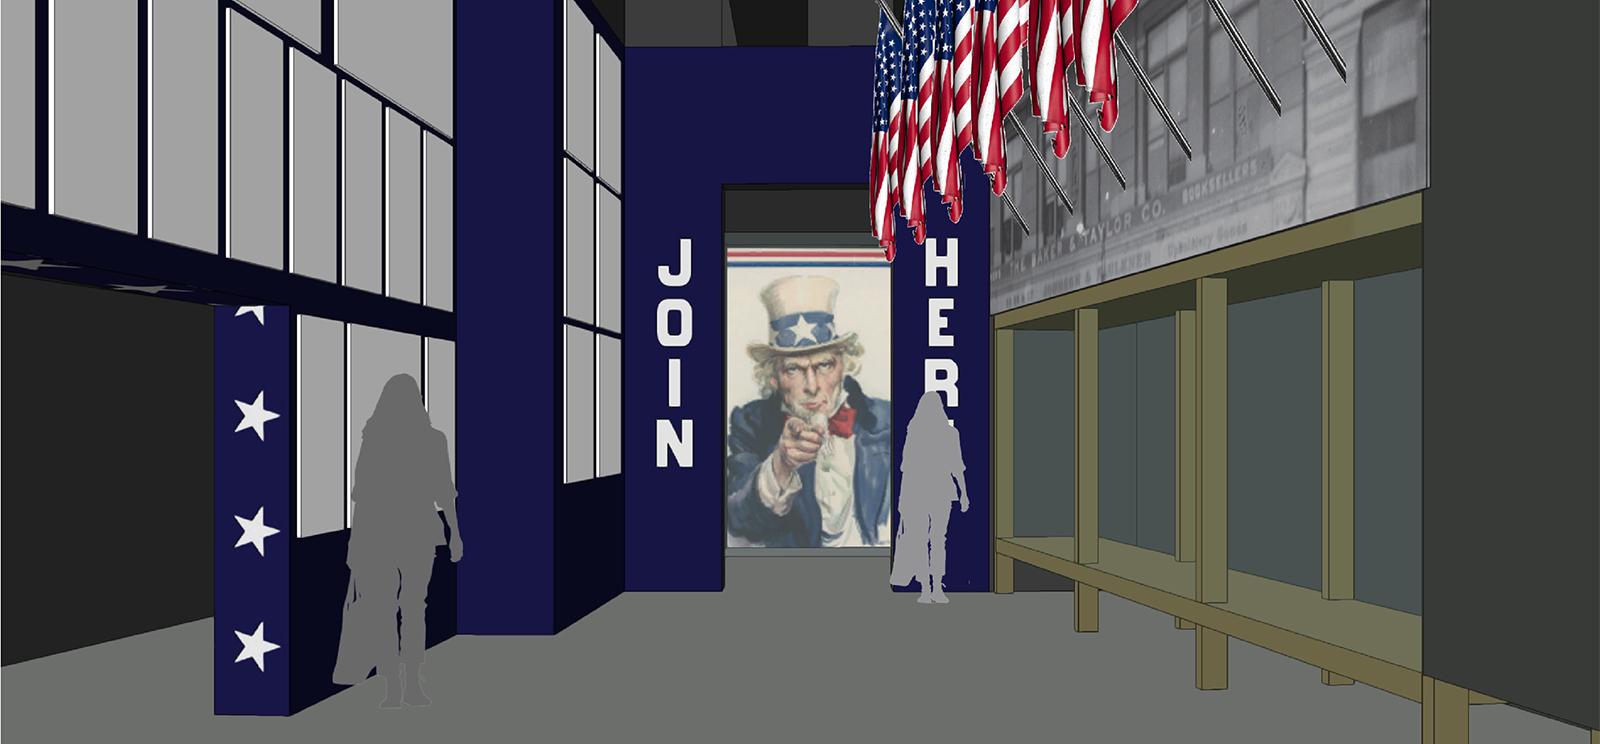 Computer rendering of a museum gallery space featuring a a row of U.S. flags and a large Uncle Sam display